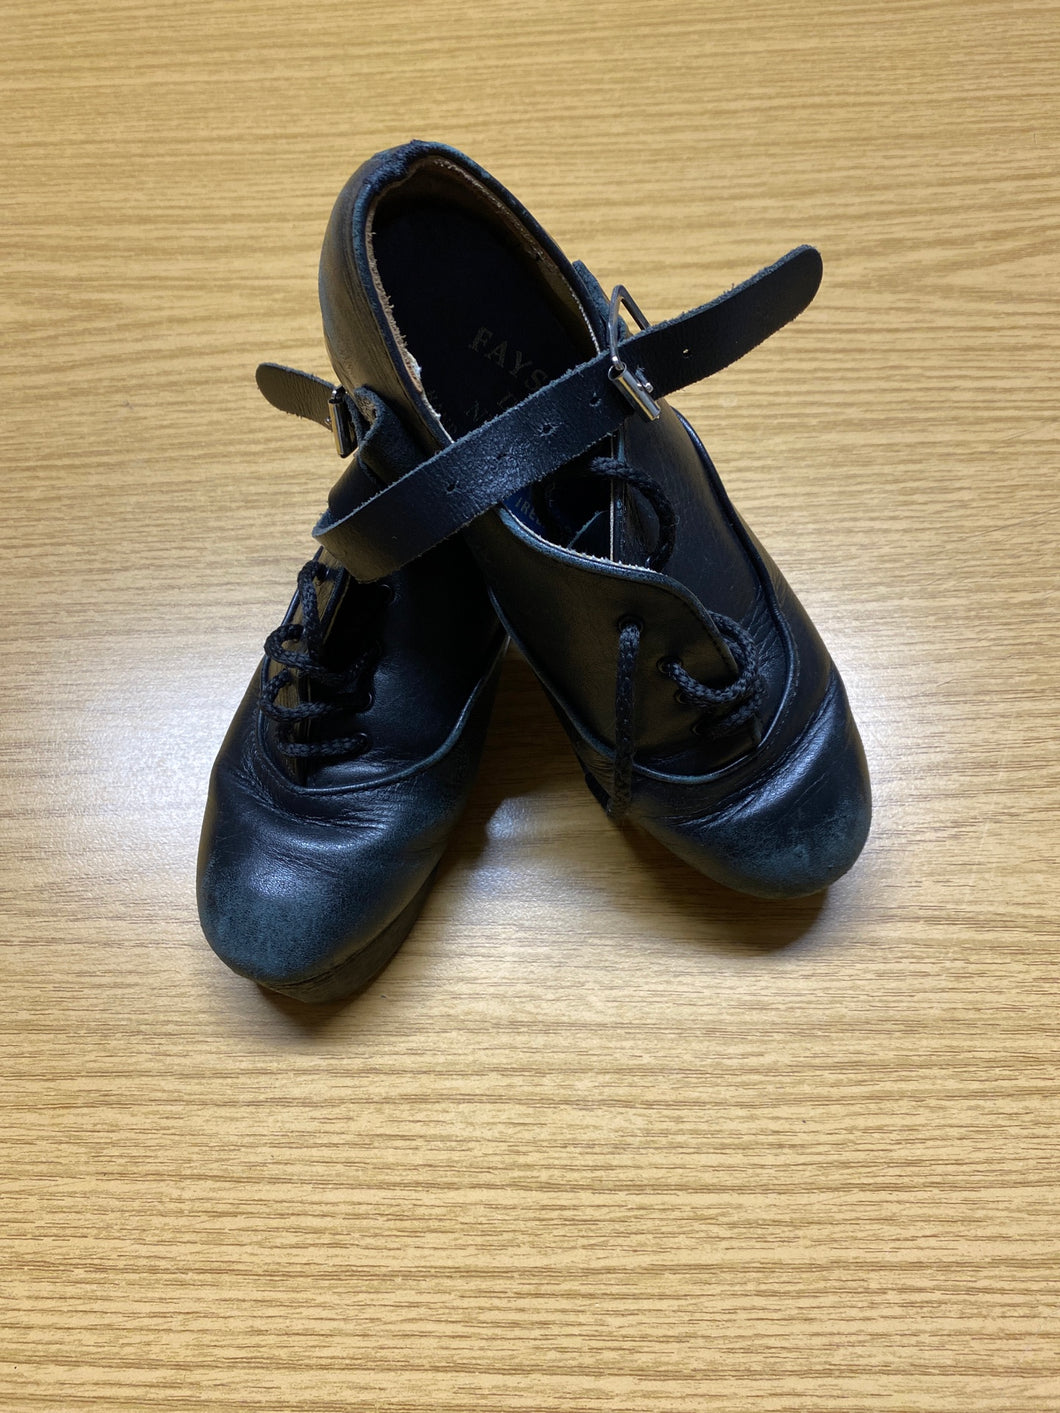 Fay's Shoes Ultra Flexi Hardshoes // Size 35 ; 2 // Condition: Used Look // Nr. 56